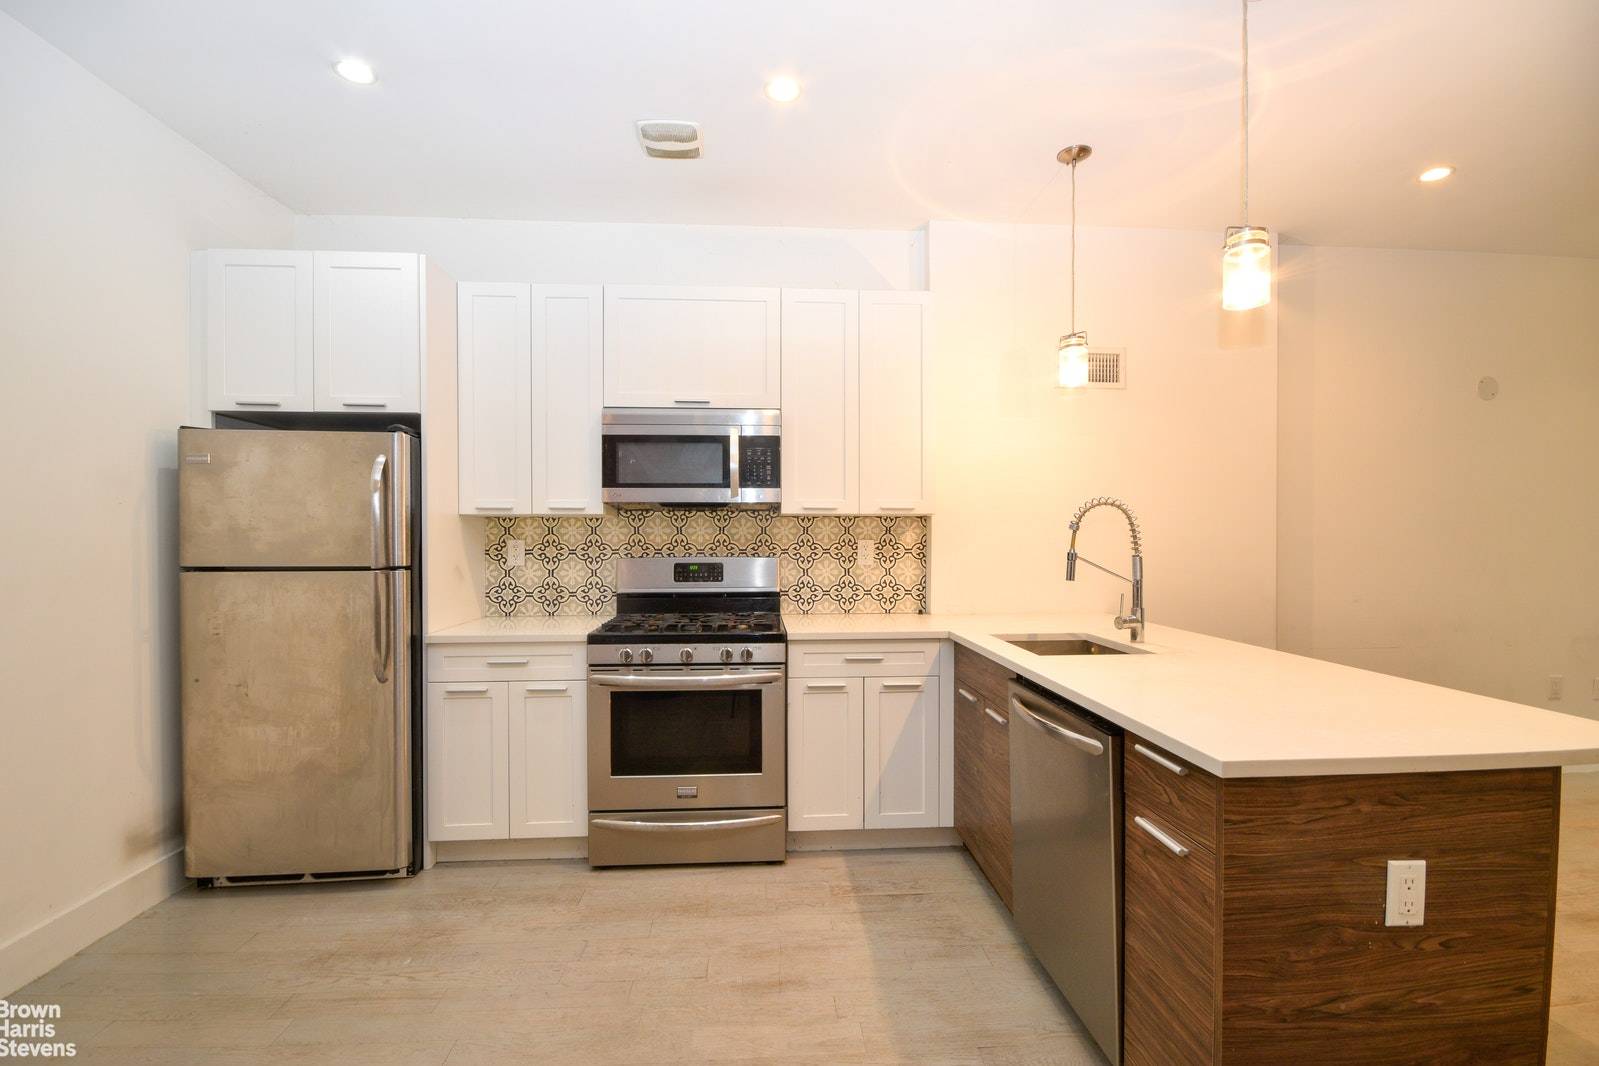 One Month Free ! There is so much to love in this beautiful 2 bedroom duplex apartment with an enormous rear yard and washer dryer near some of Bed Stuy's ...